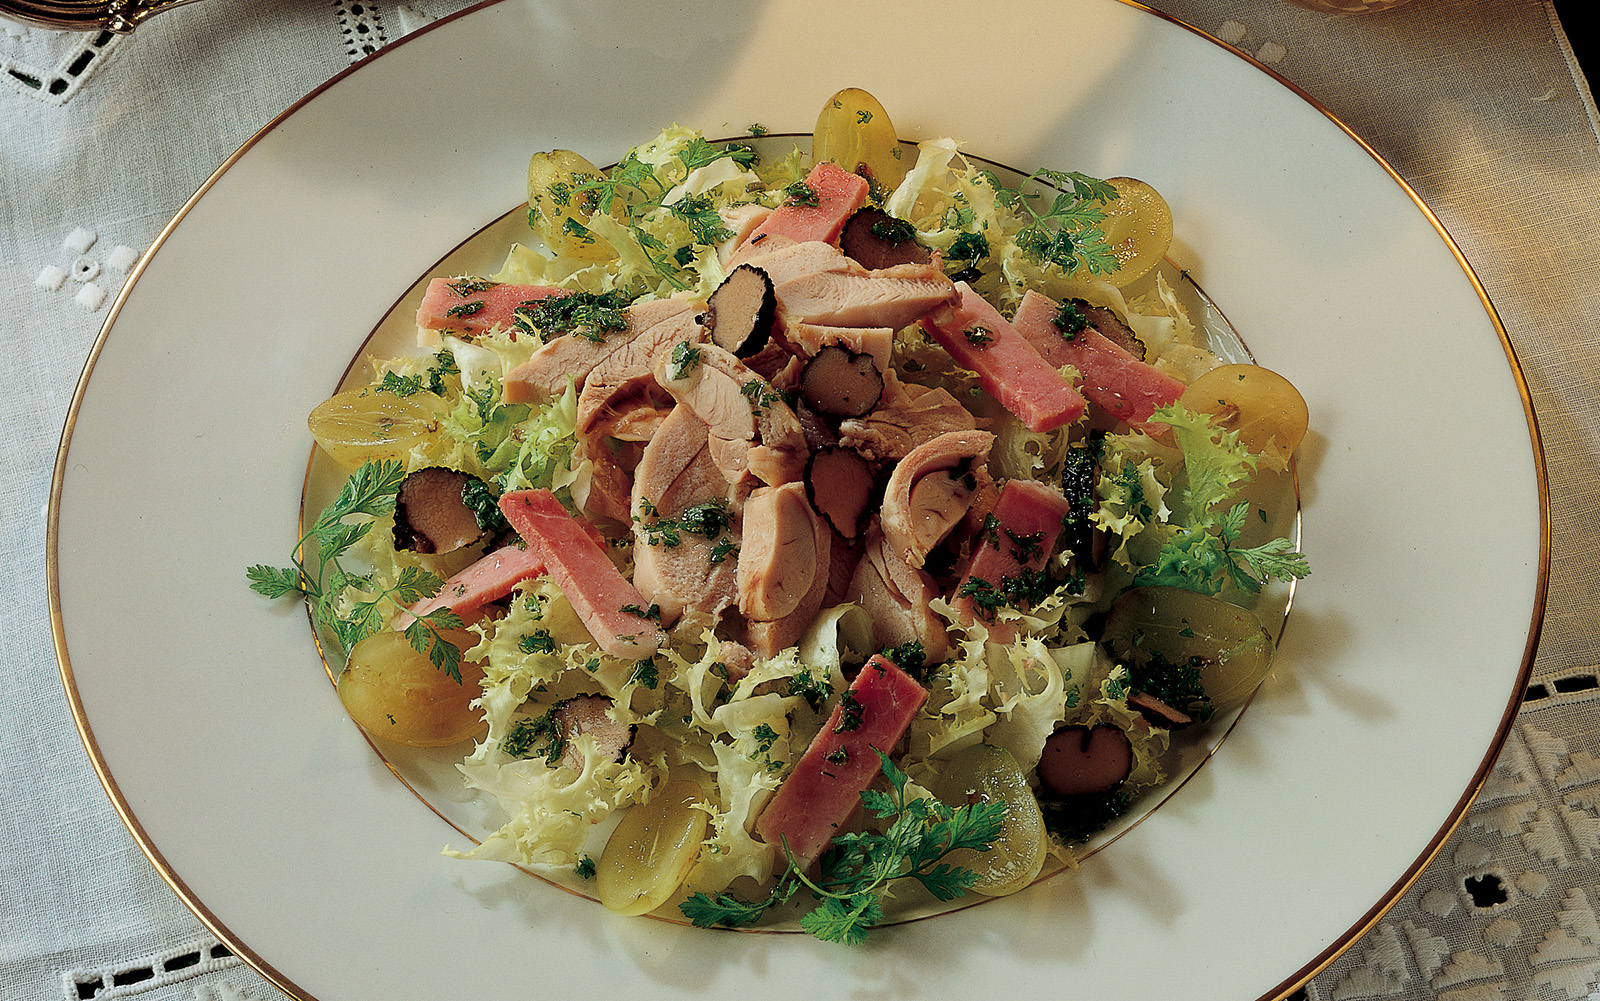 Capon salad with grapes